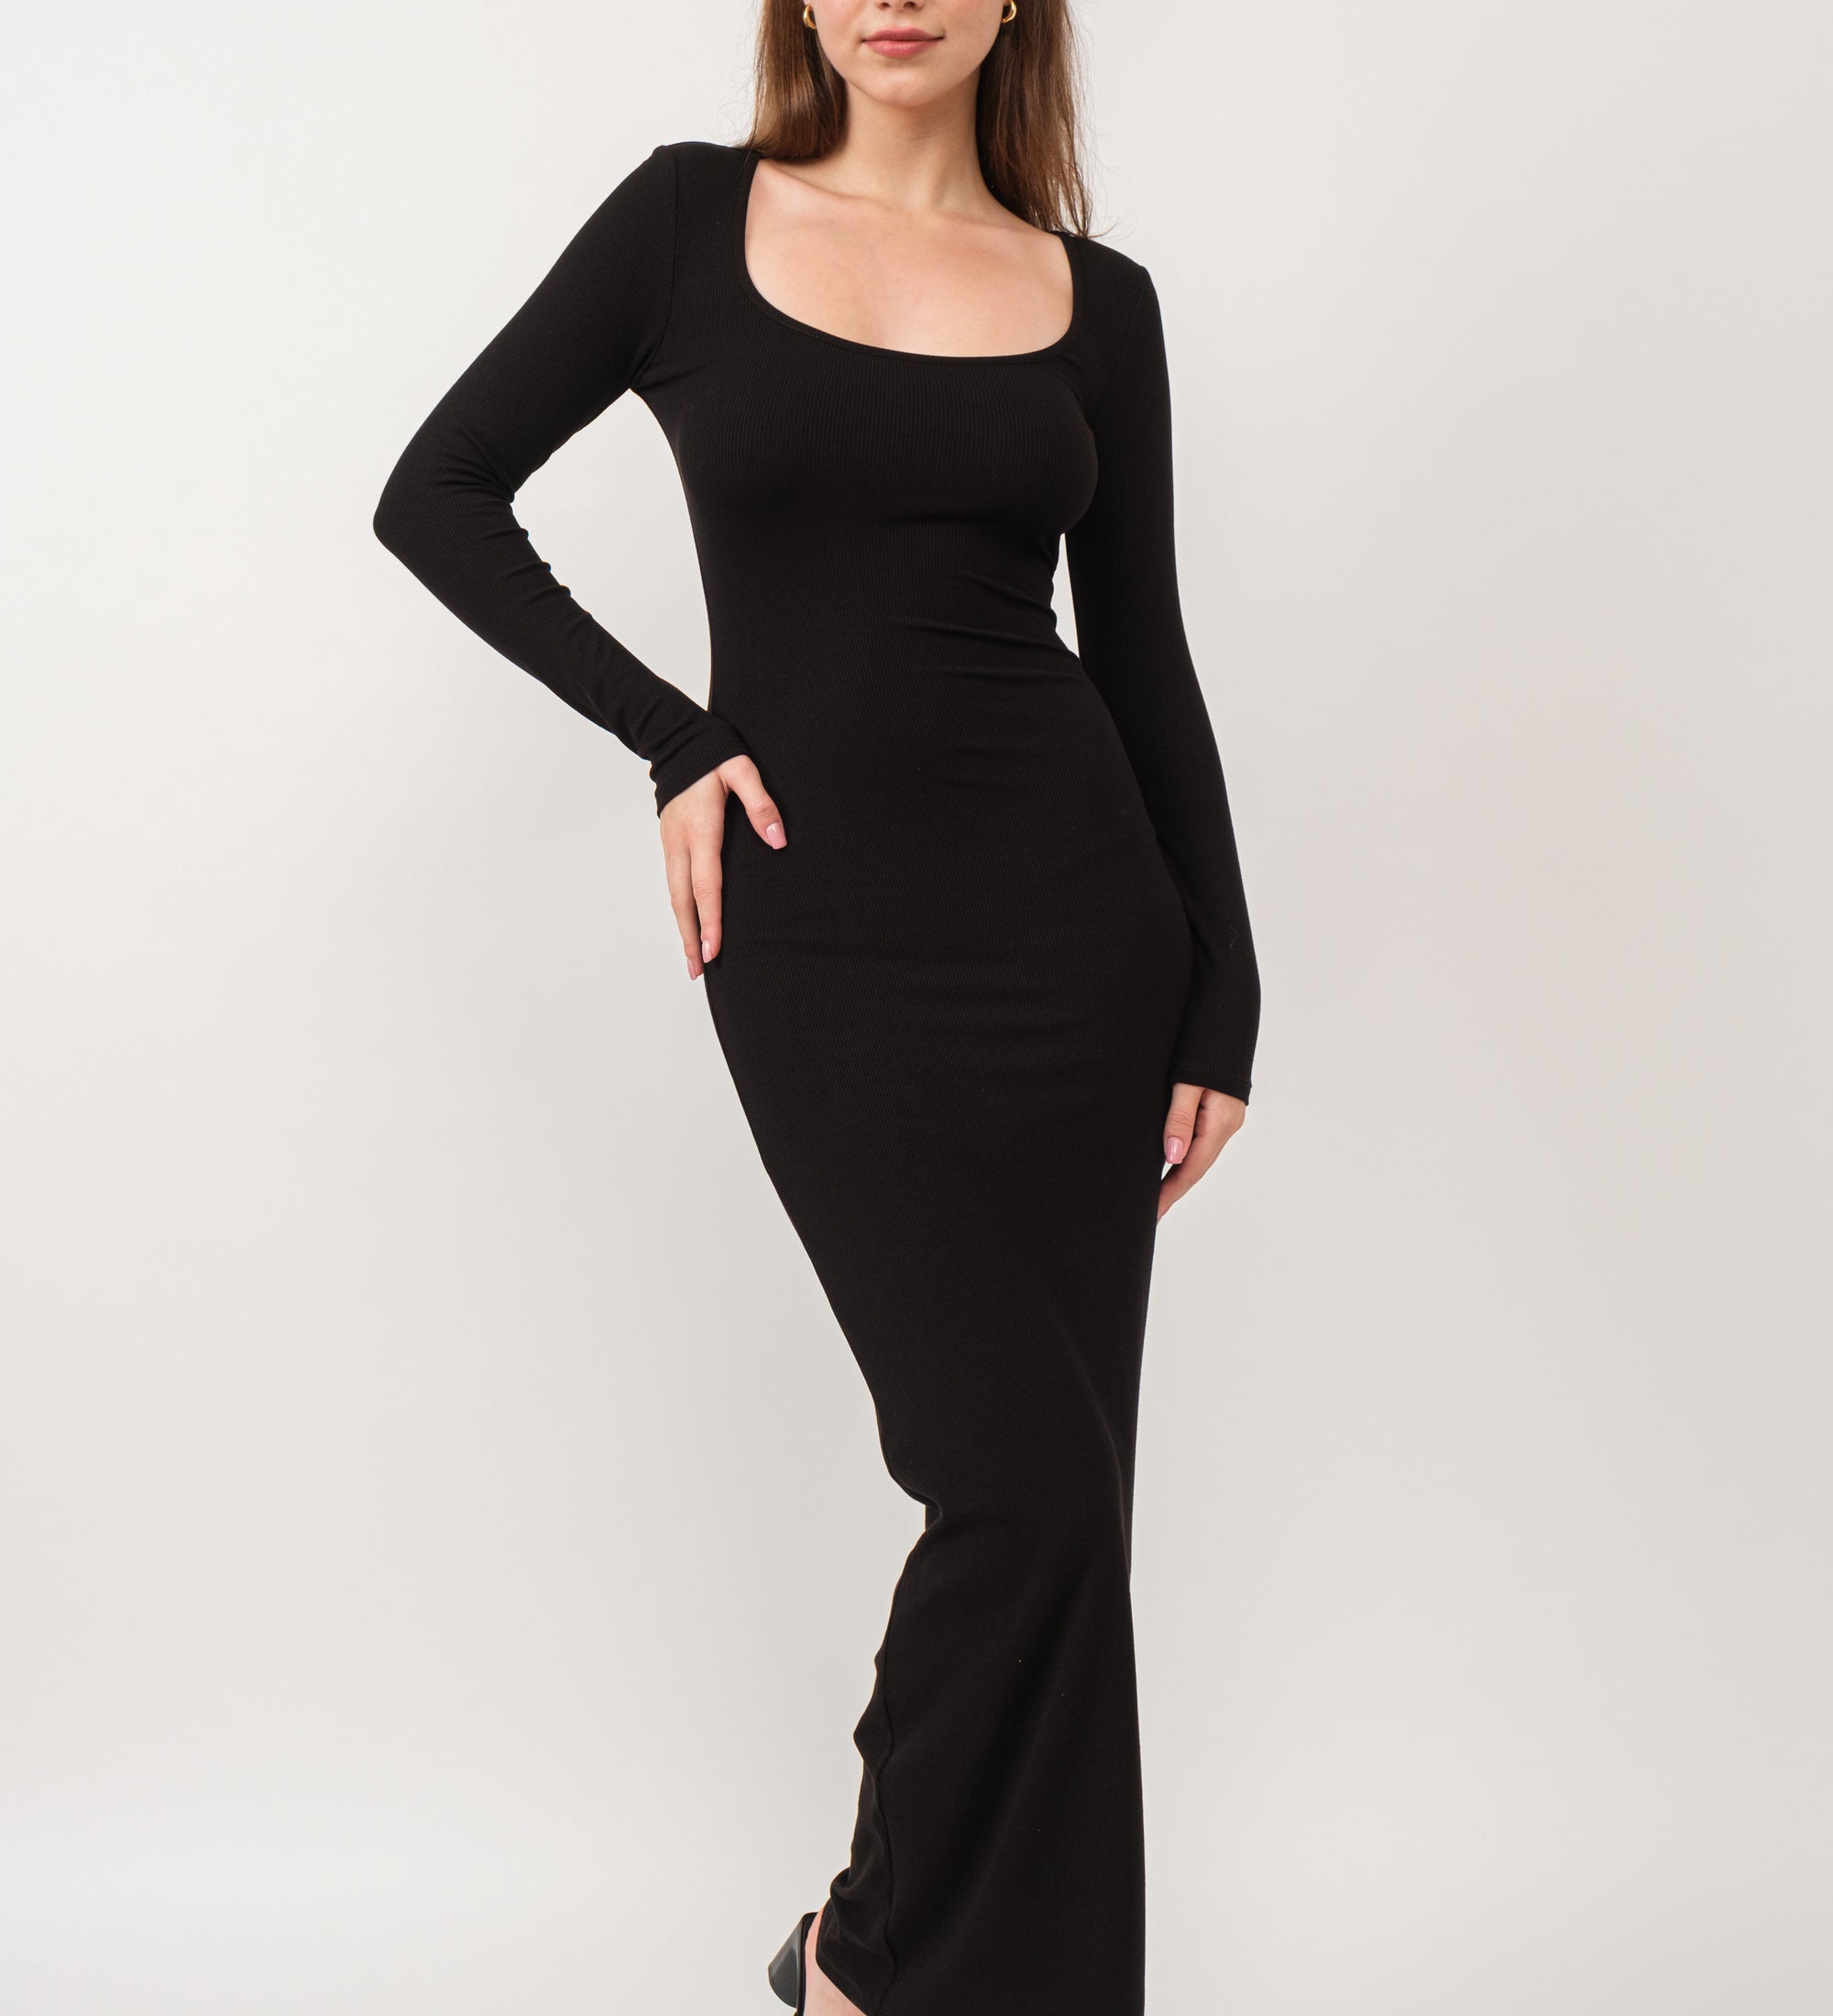 A model wearing a black ribbed maxi dress against a white wall.